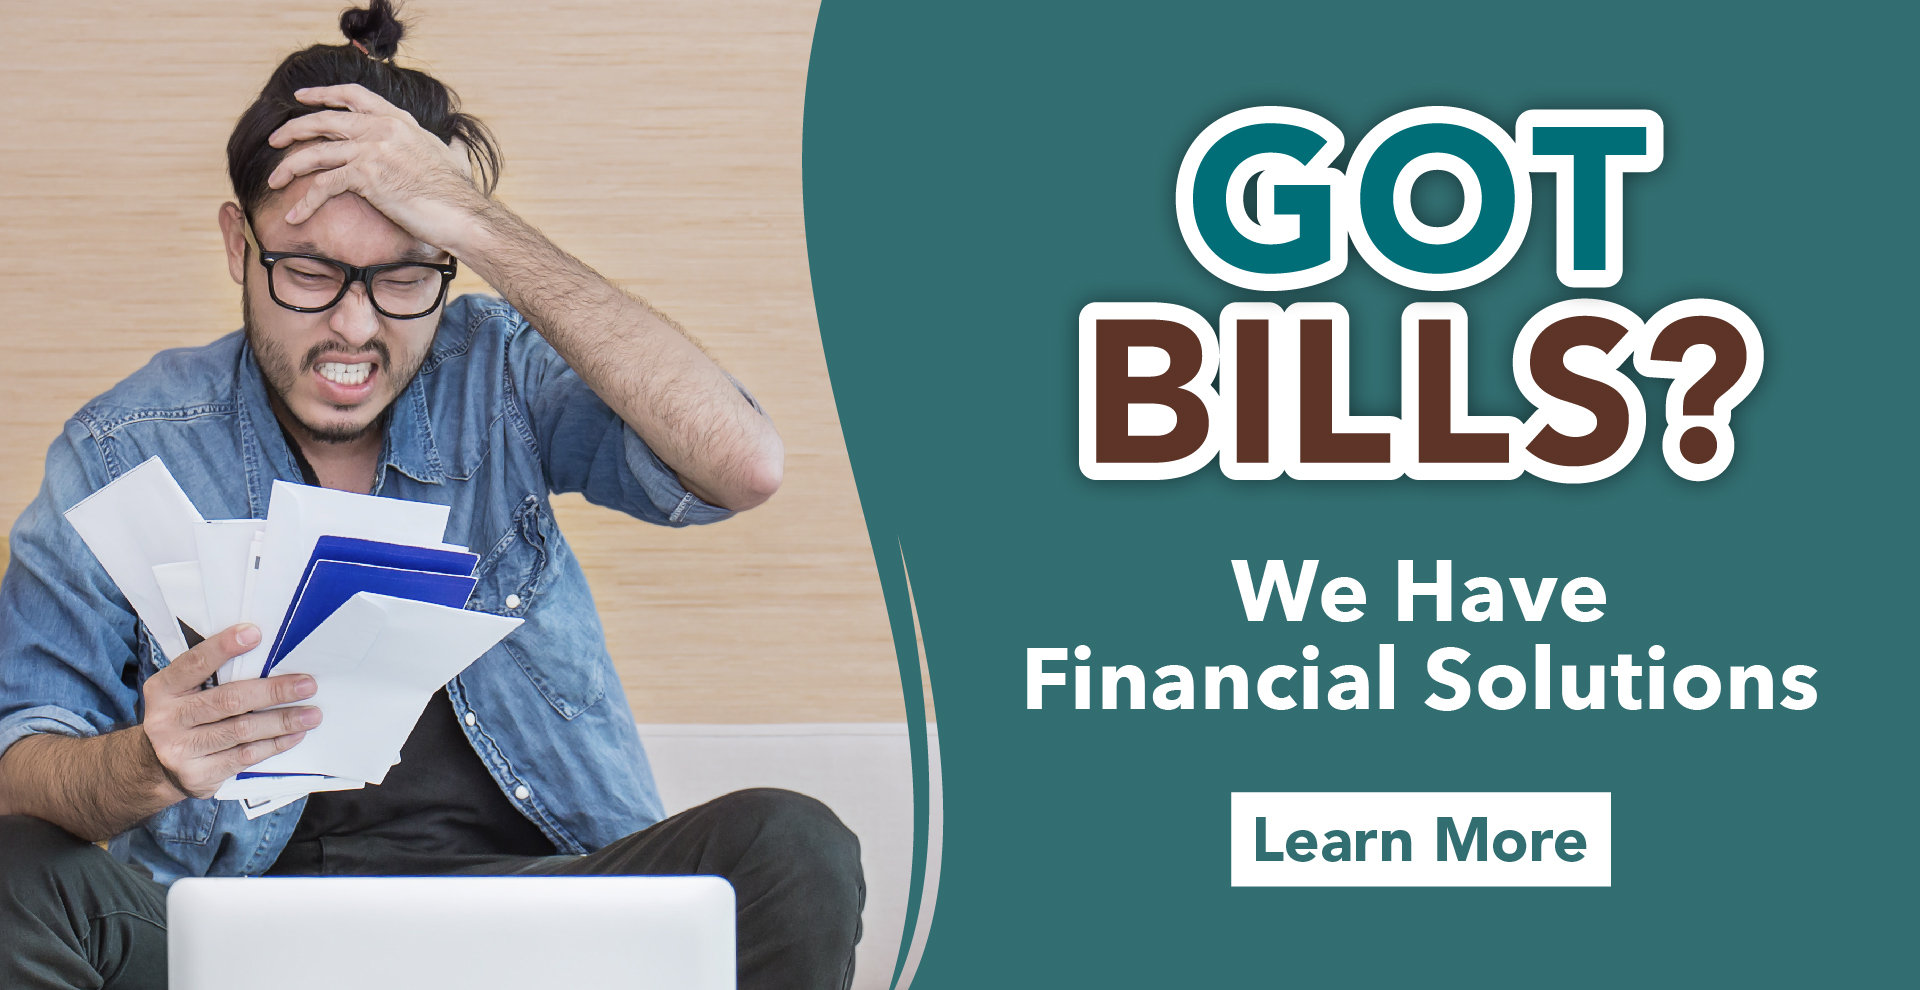 Got Bills? We Have Financial Solutions - Learn More